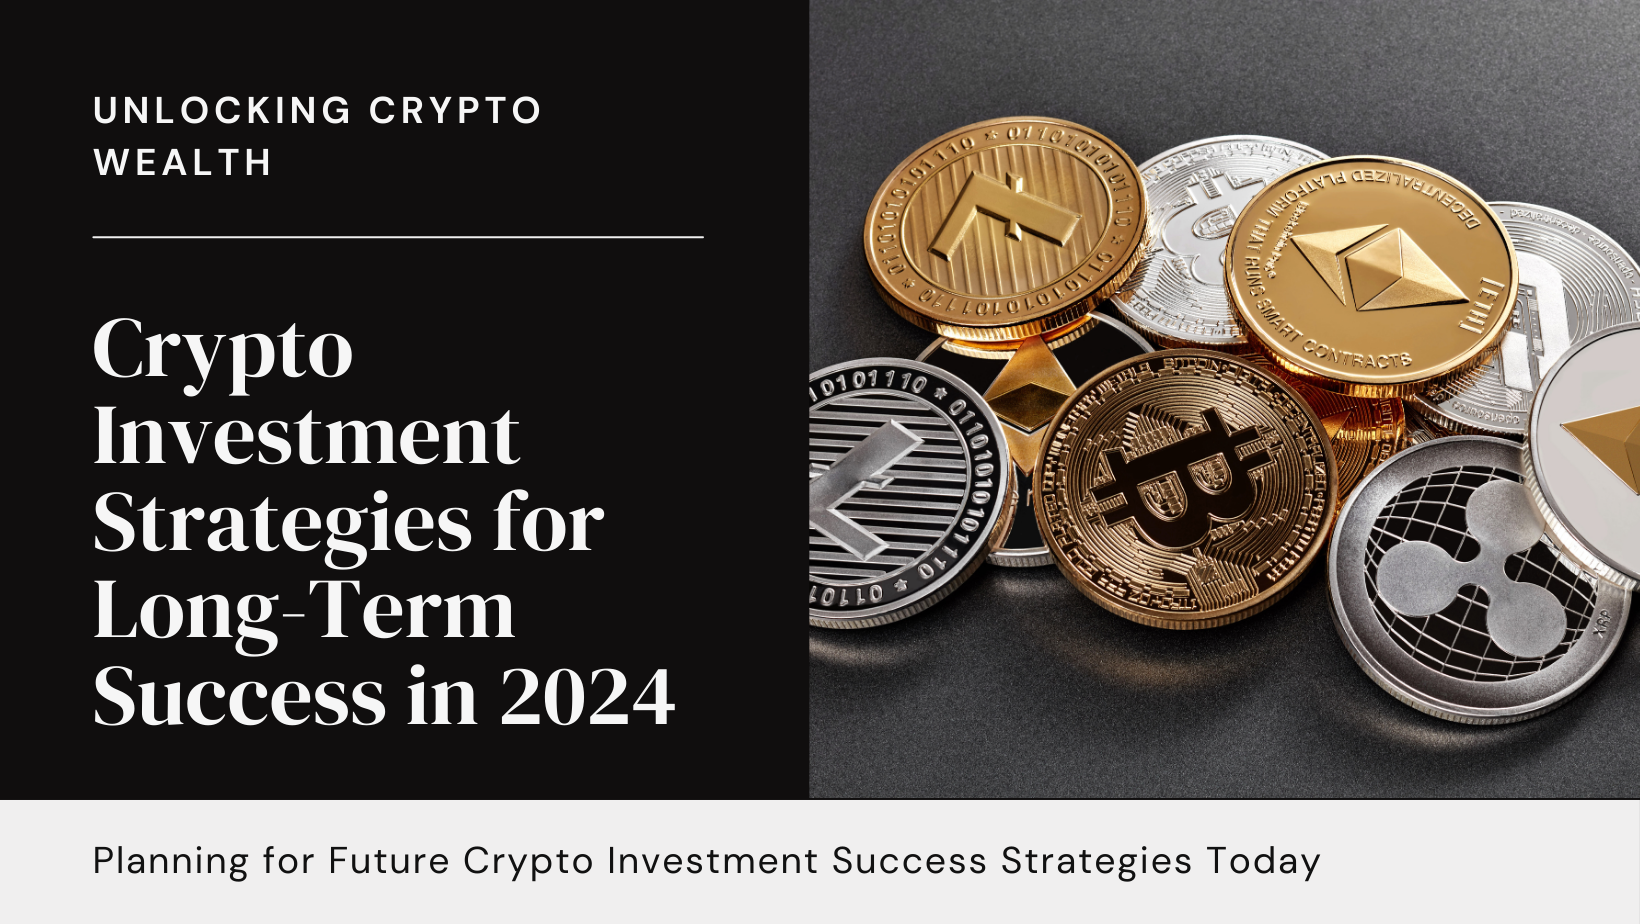 Strategies for Long-Term Crypto Investment Success in 2024